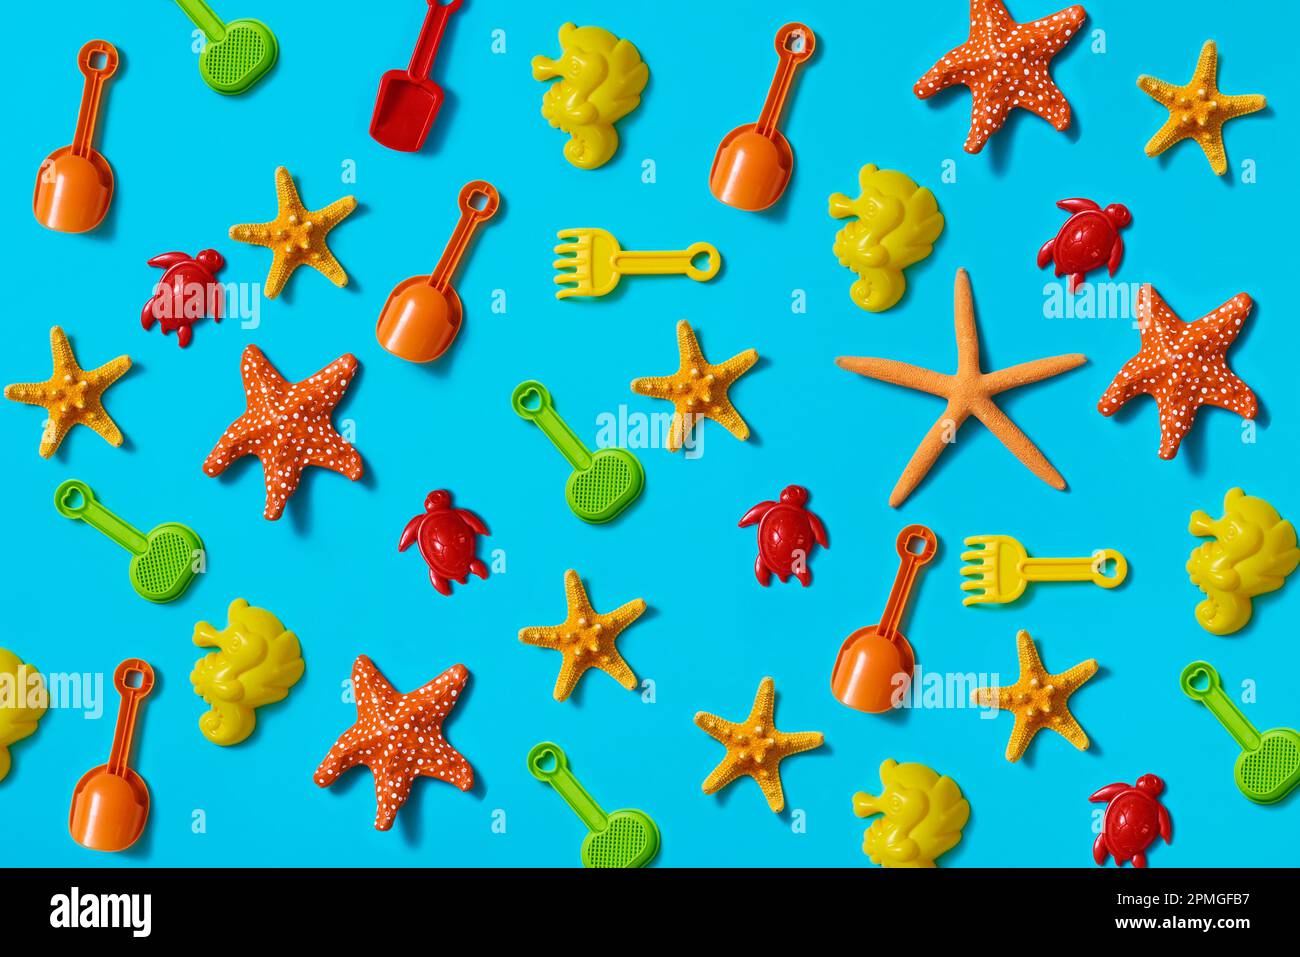 some beach shovels and rackets, some sand molds in the shape of seahorses and turtles, and some natural and fake starfish on a blue background Stock Photo